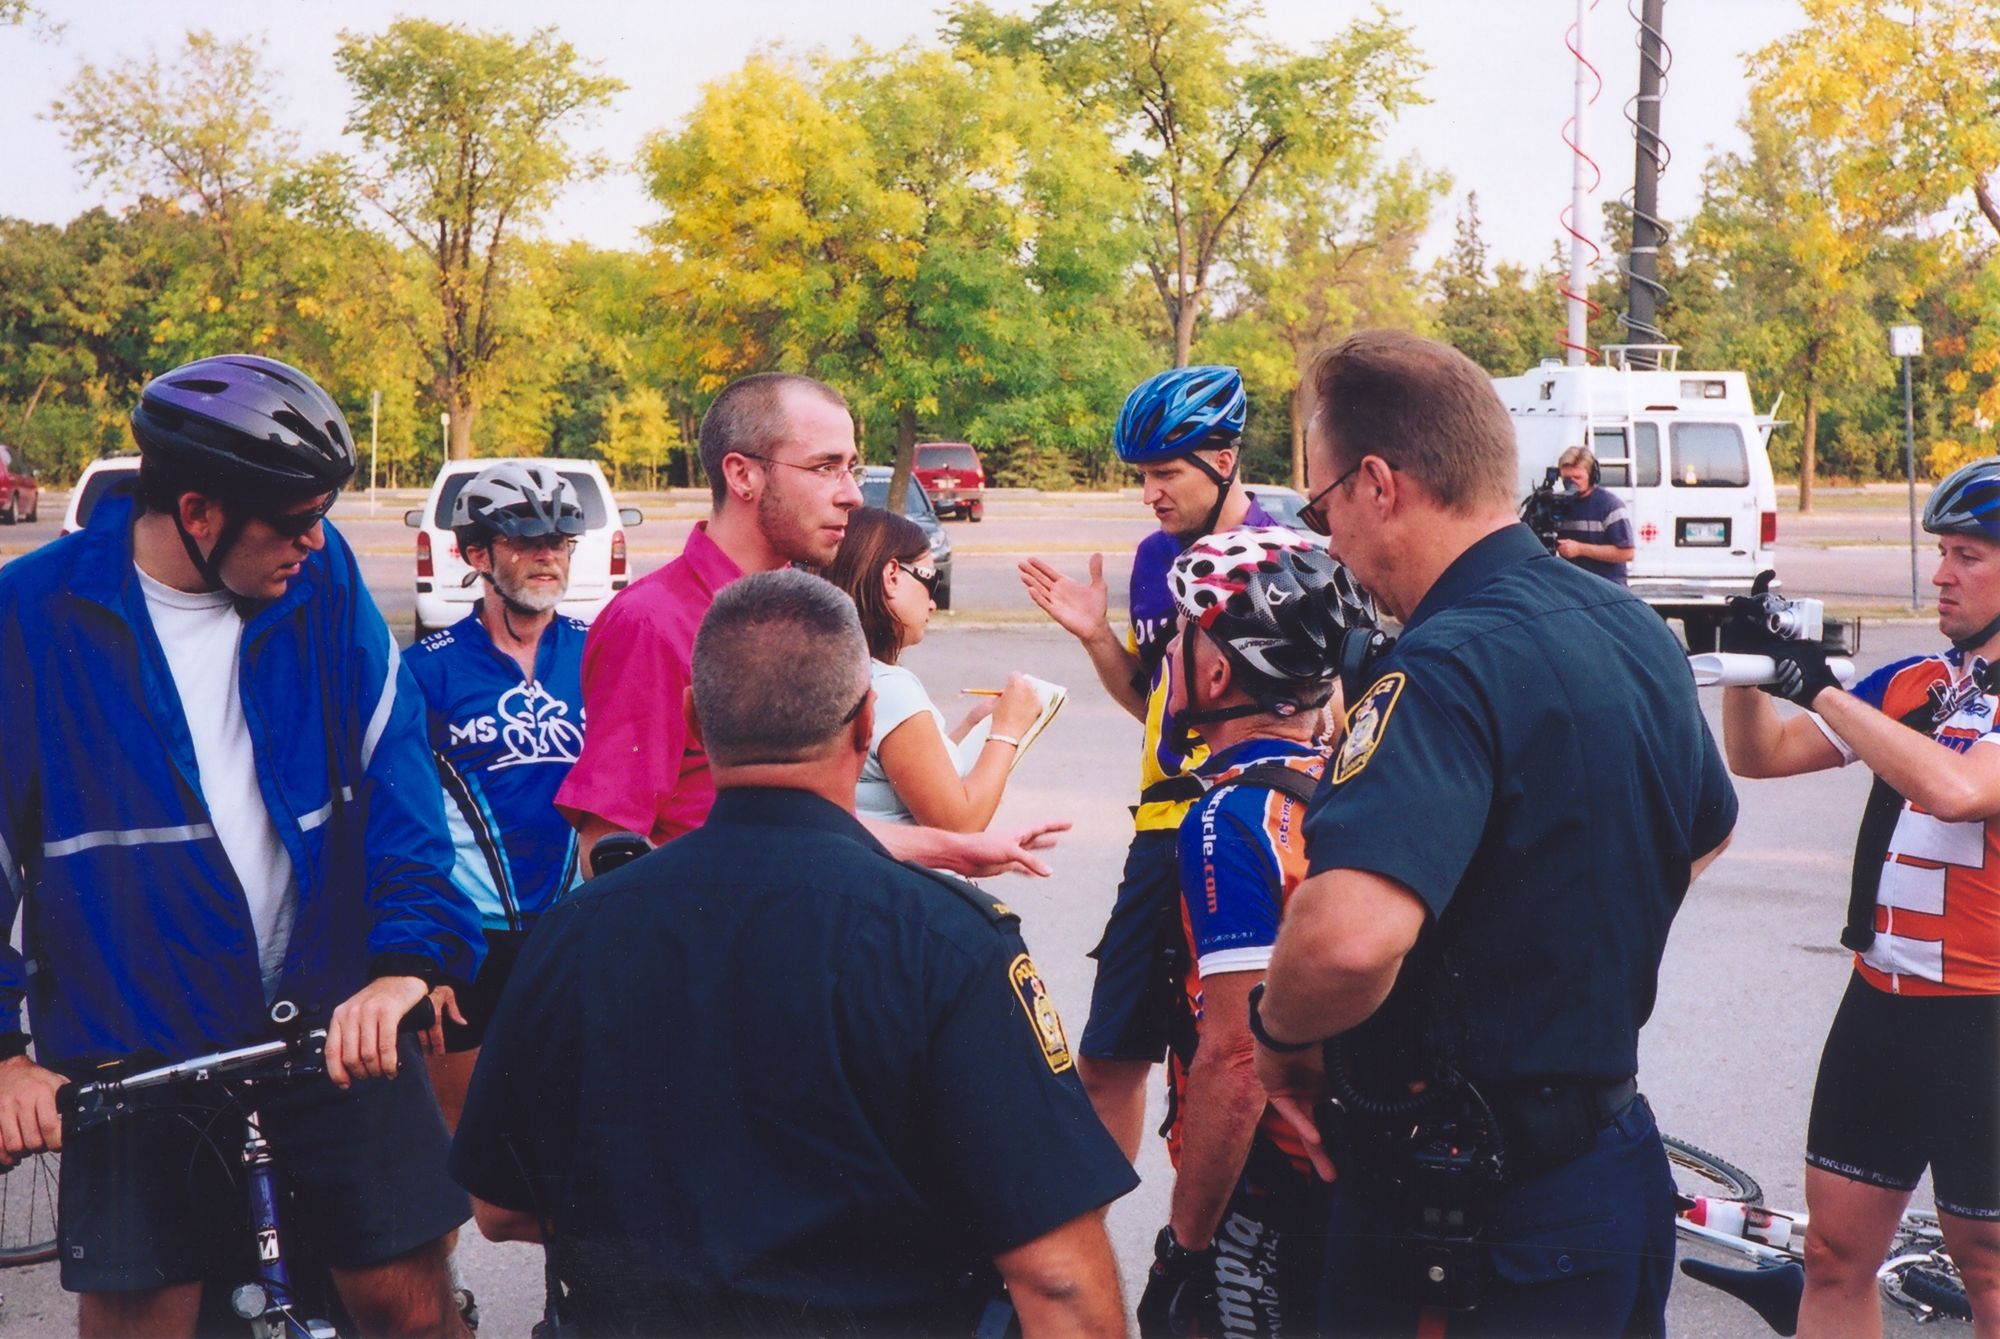 A photo of variously-facing people in cyclist gear and two police officers